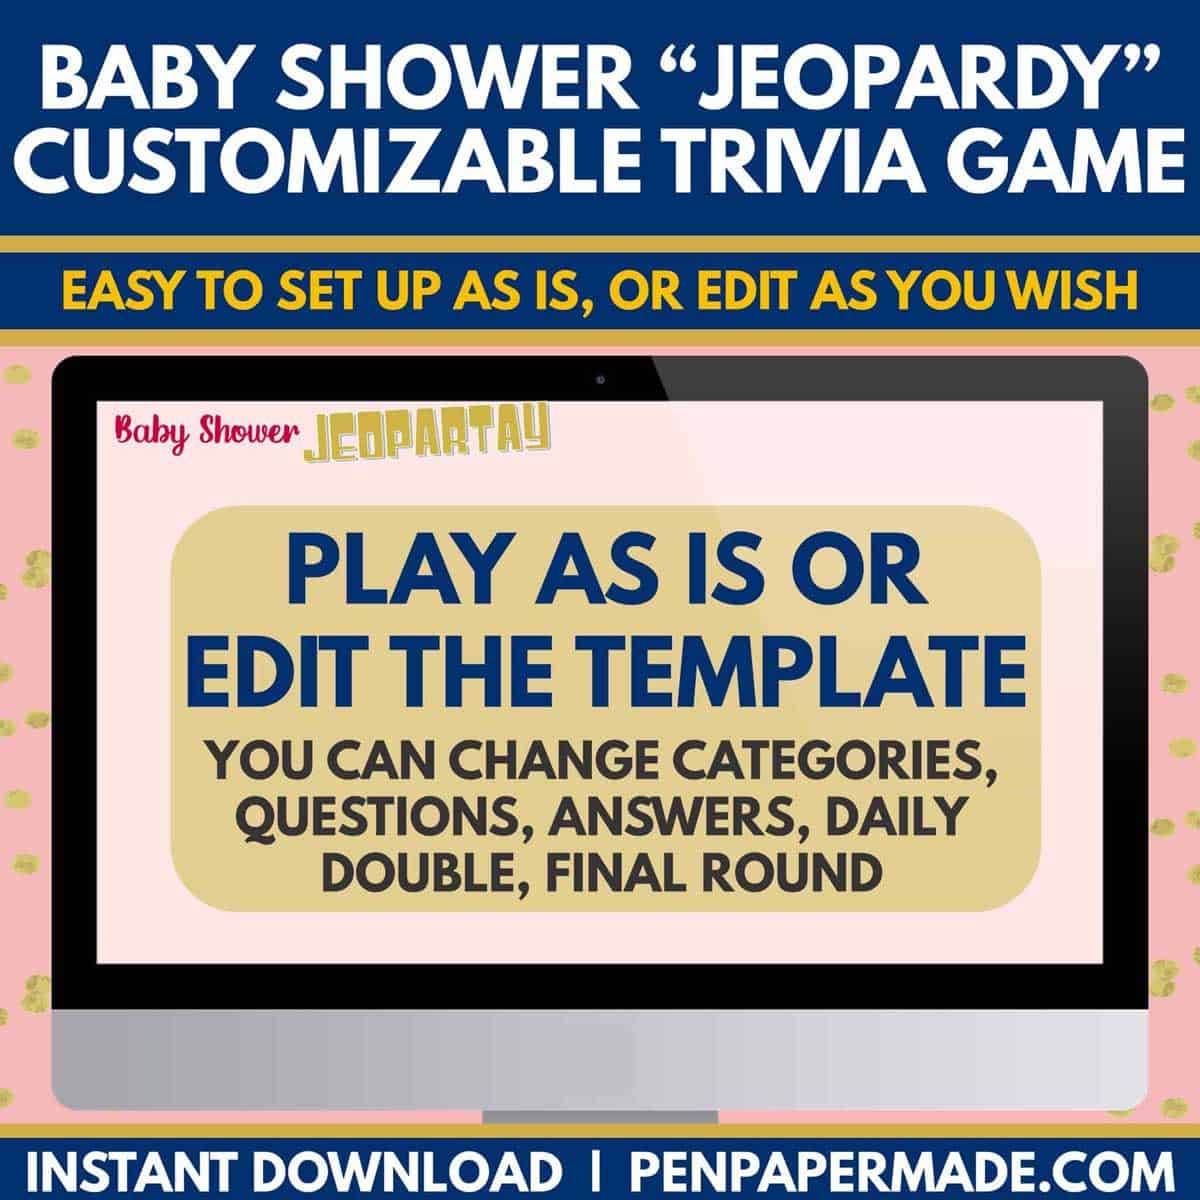 pre-loaded pink baby shower jeopardy questions to play as is or edit template with own questions.